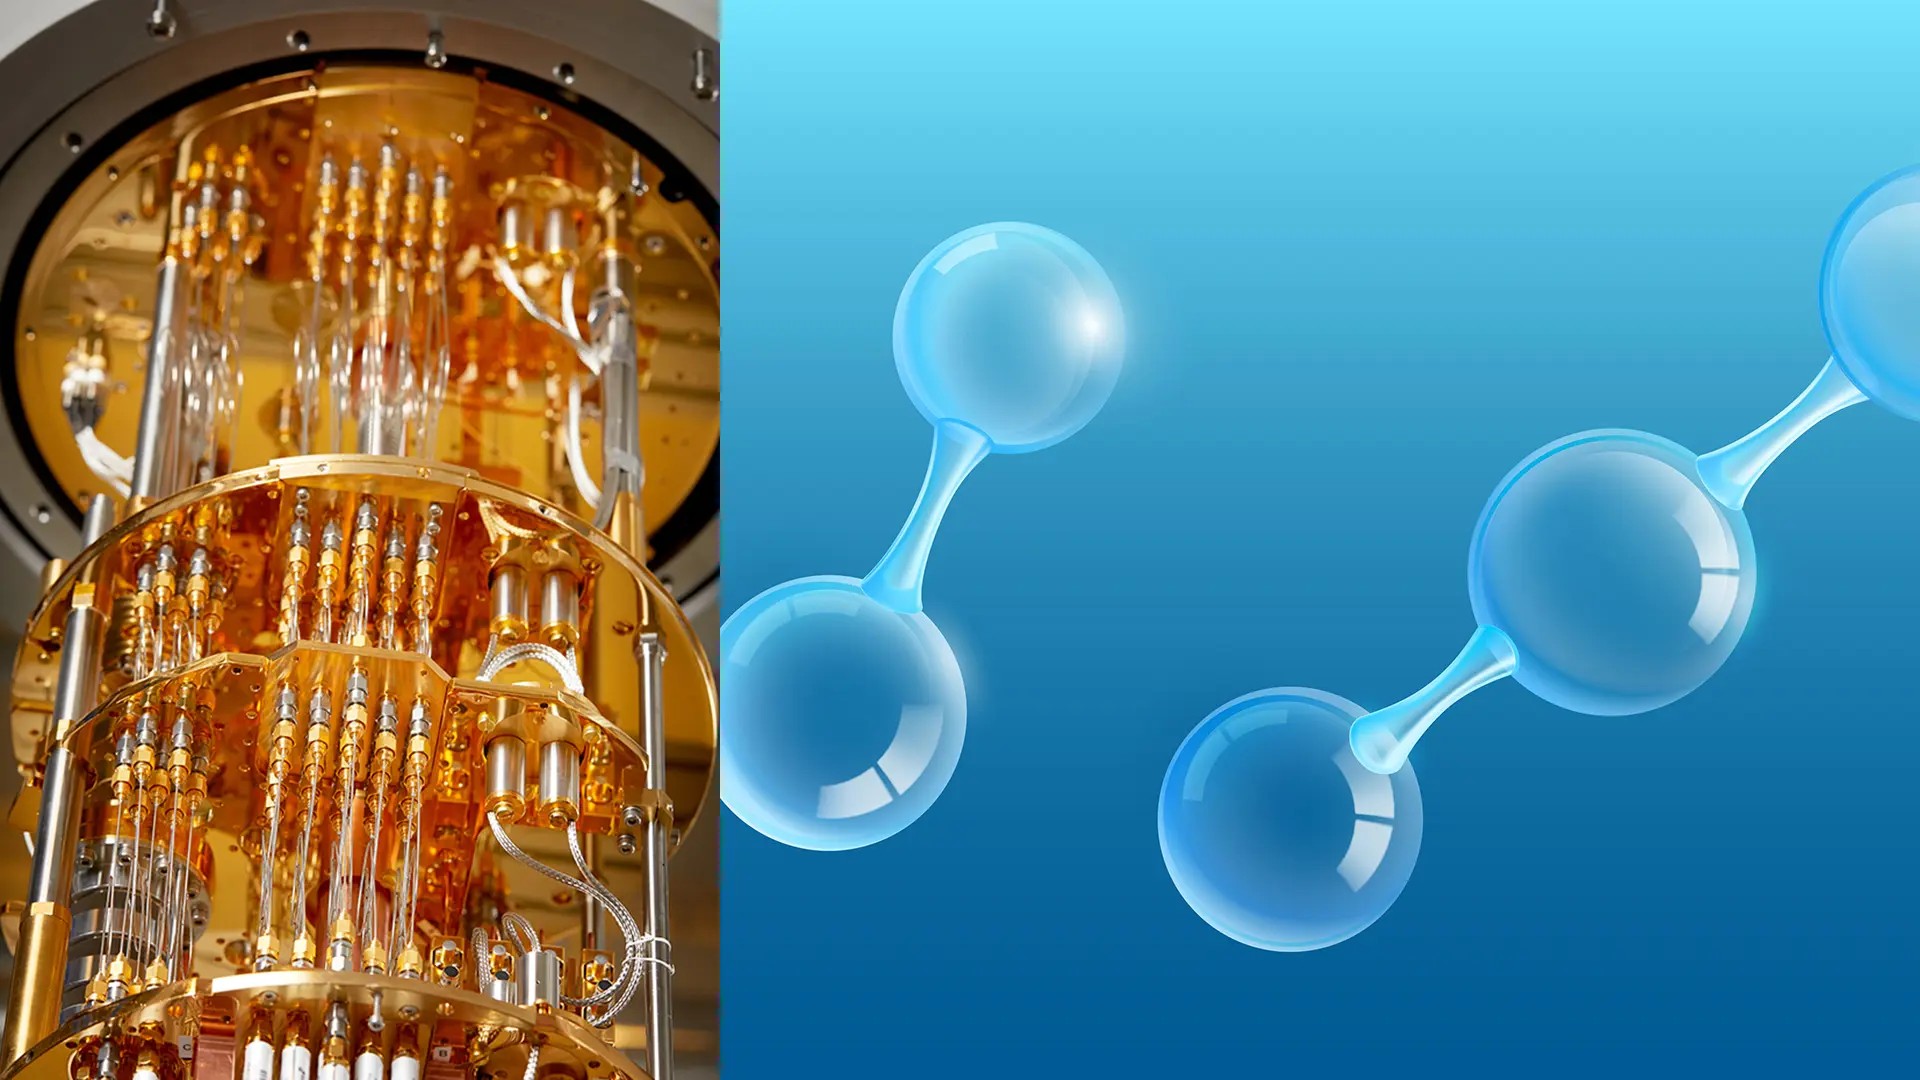 Collage photo quantom computer and illustration molecules in 3D